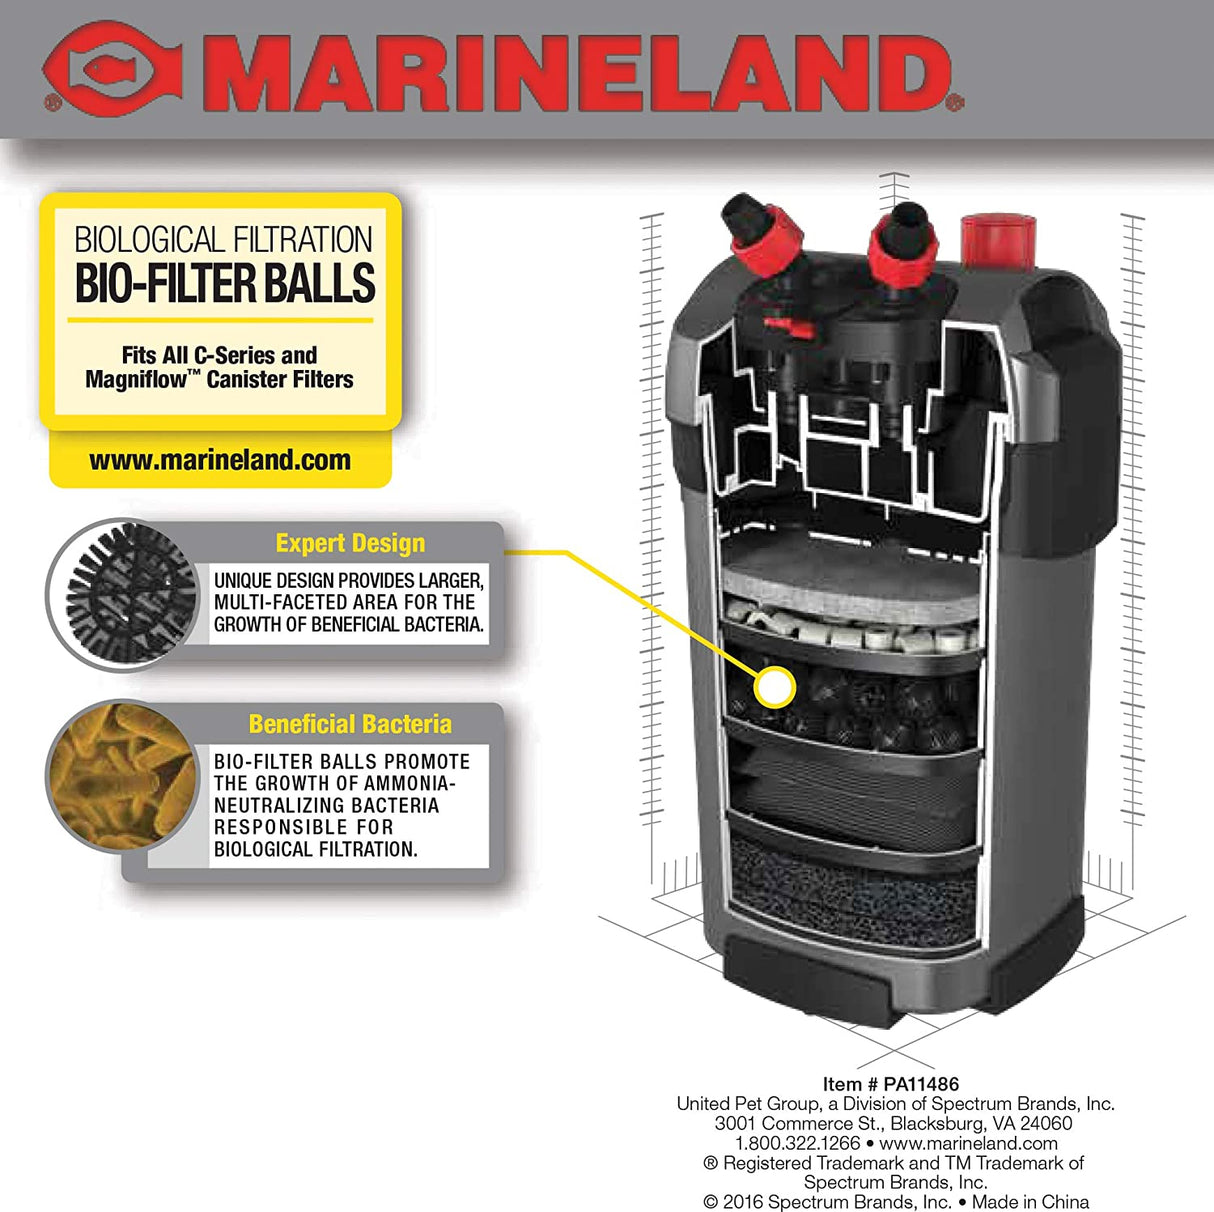 90 count Marineland Bio-Filter Balls for Magniflow and C-Series Filters